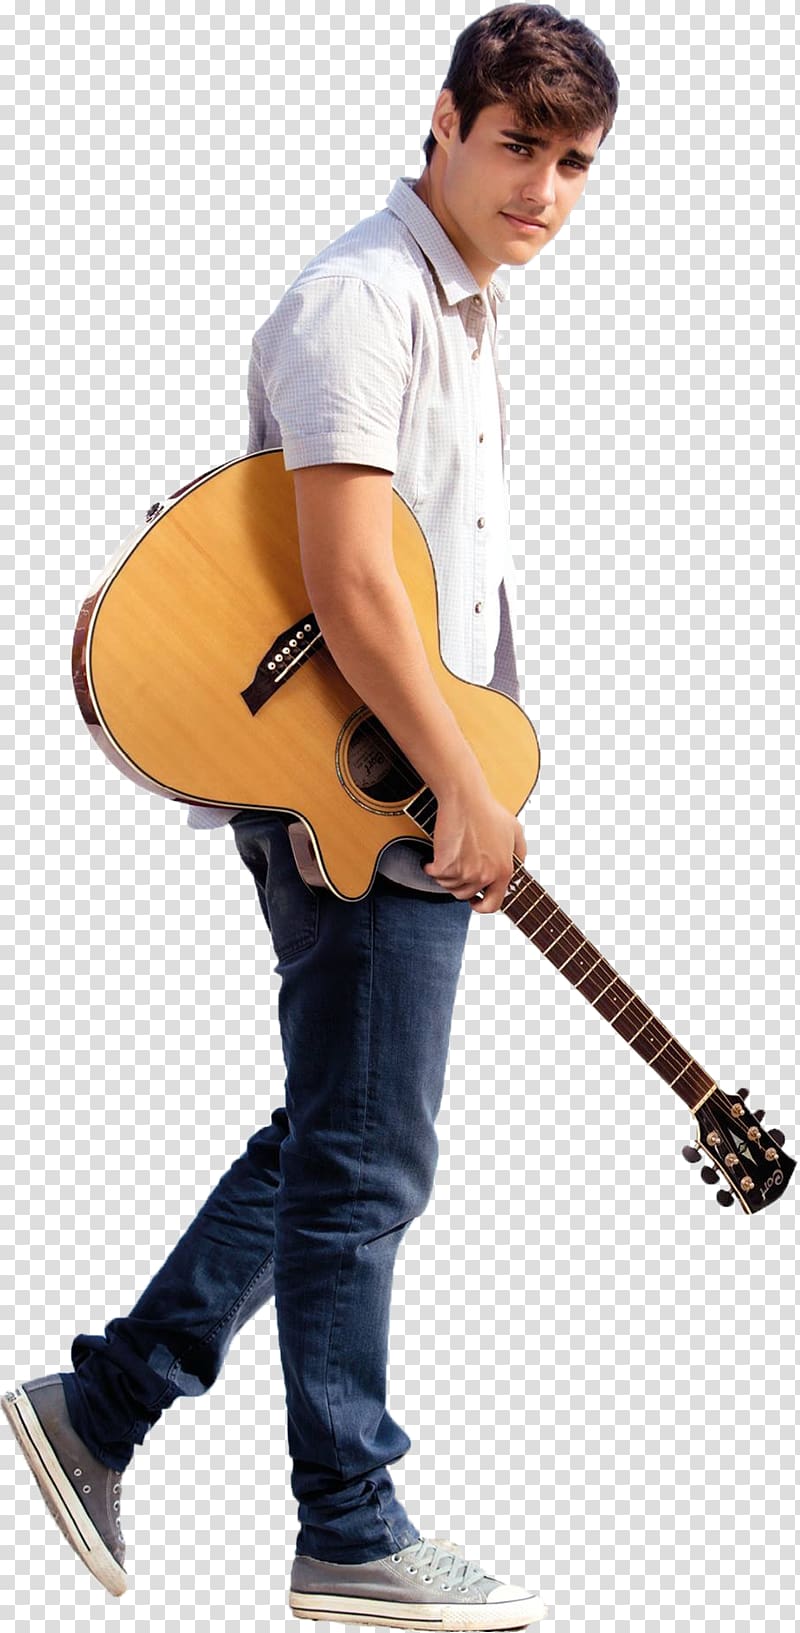 Jorge Blanco Tini: The Movie León Violetta, others transparent background PNG clipart